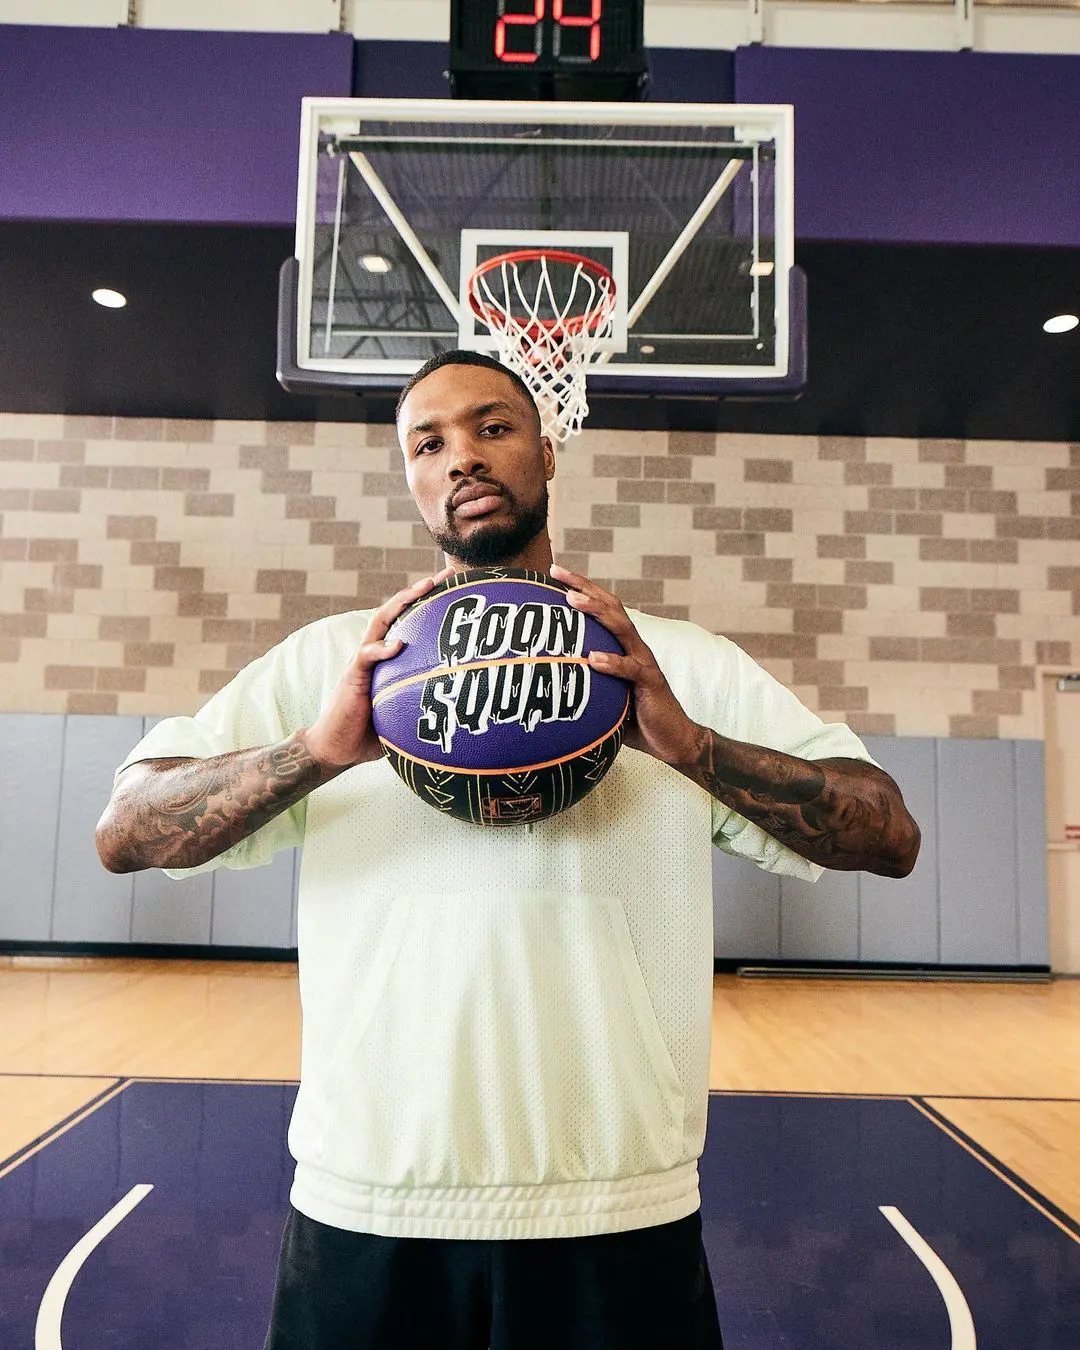 Damian promoting Spalding x Space Jam Goon Squad ‘Glow’ in July 2021